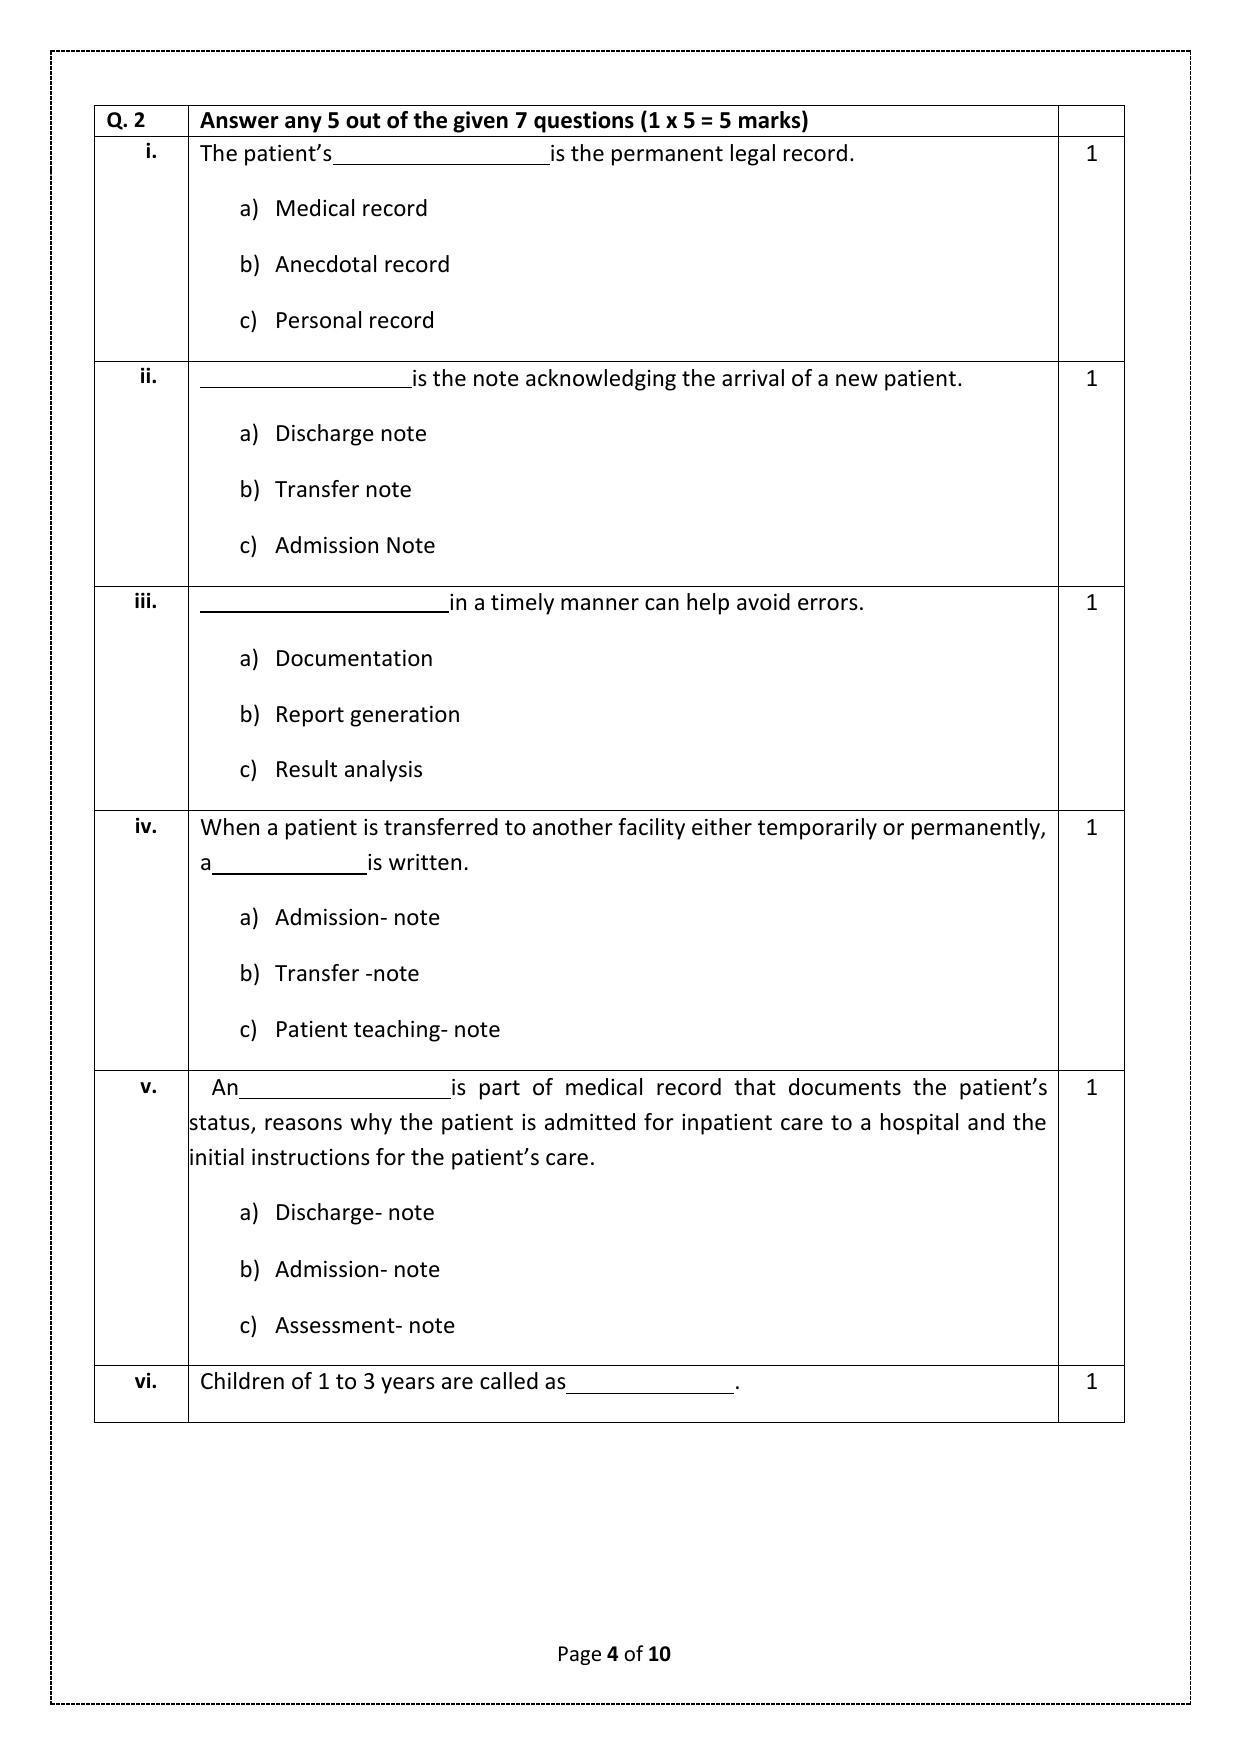 CBSE Class 12 Health Care (Skill Education) Sample Papers 2023 - Page 4